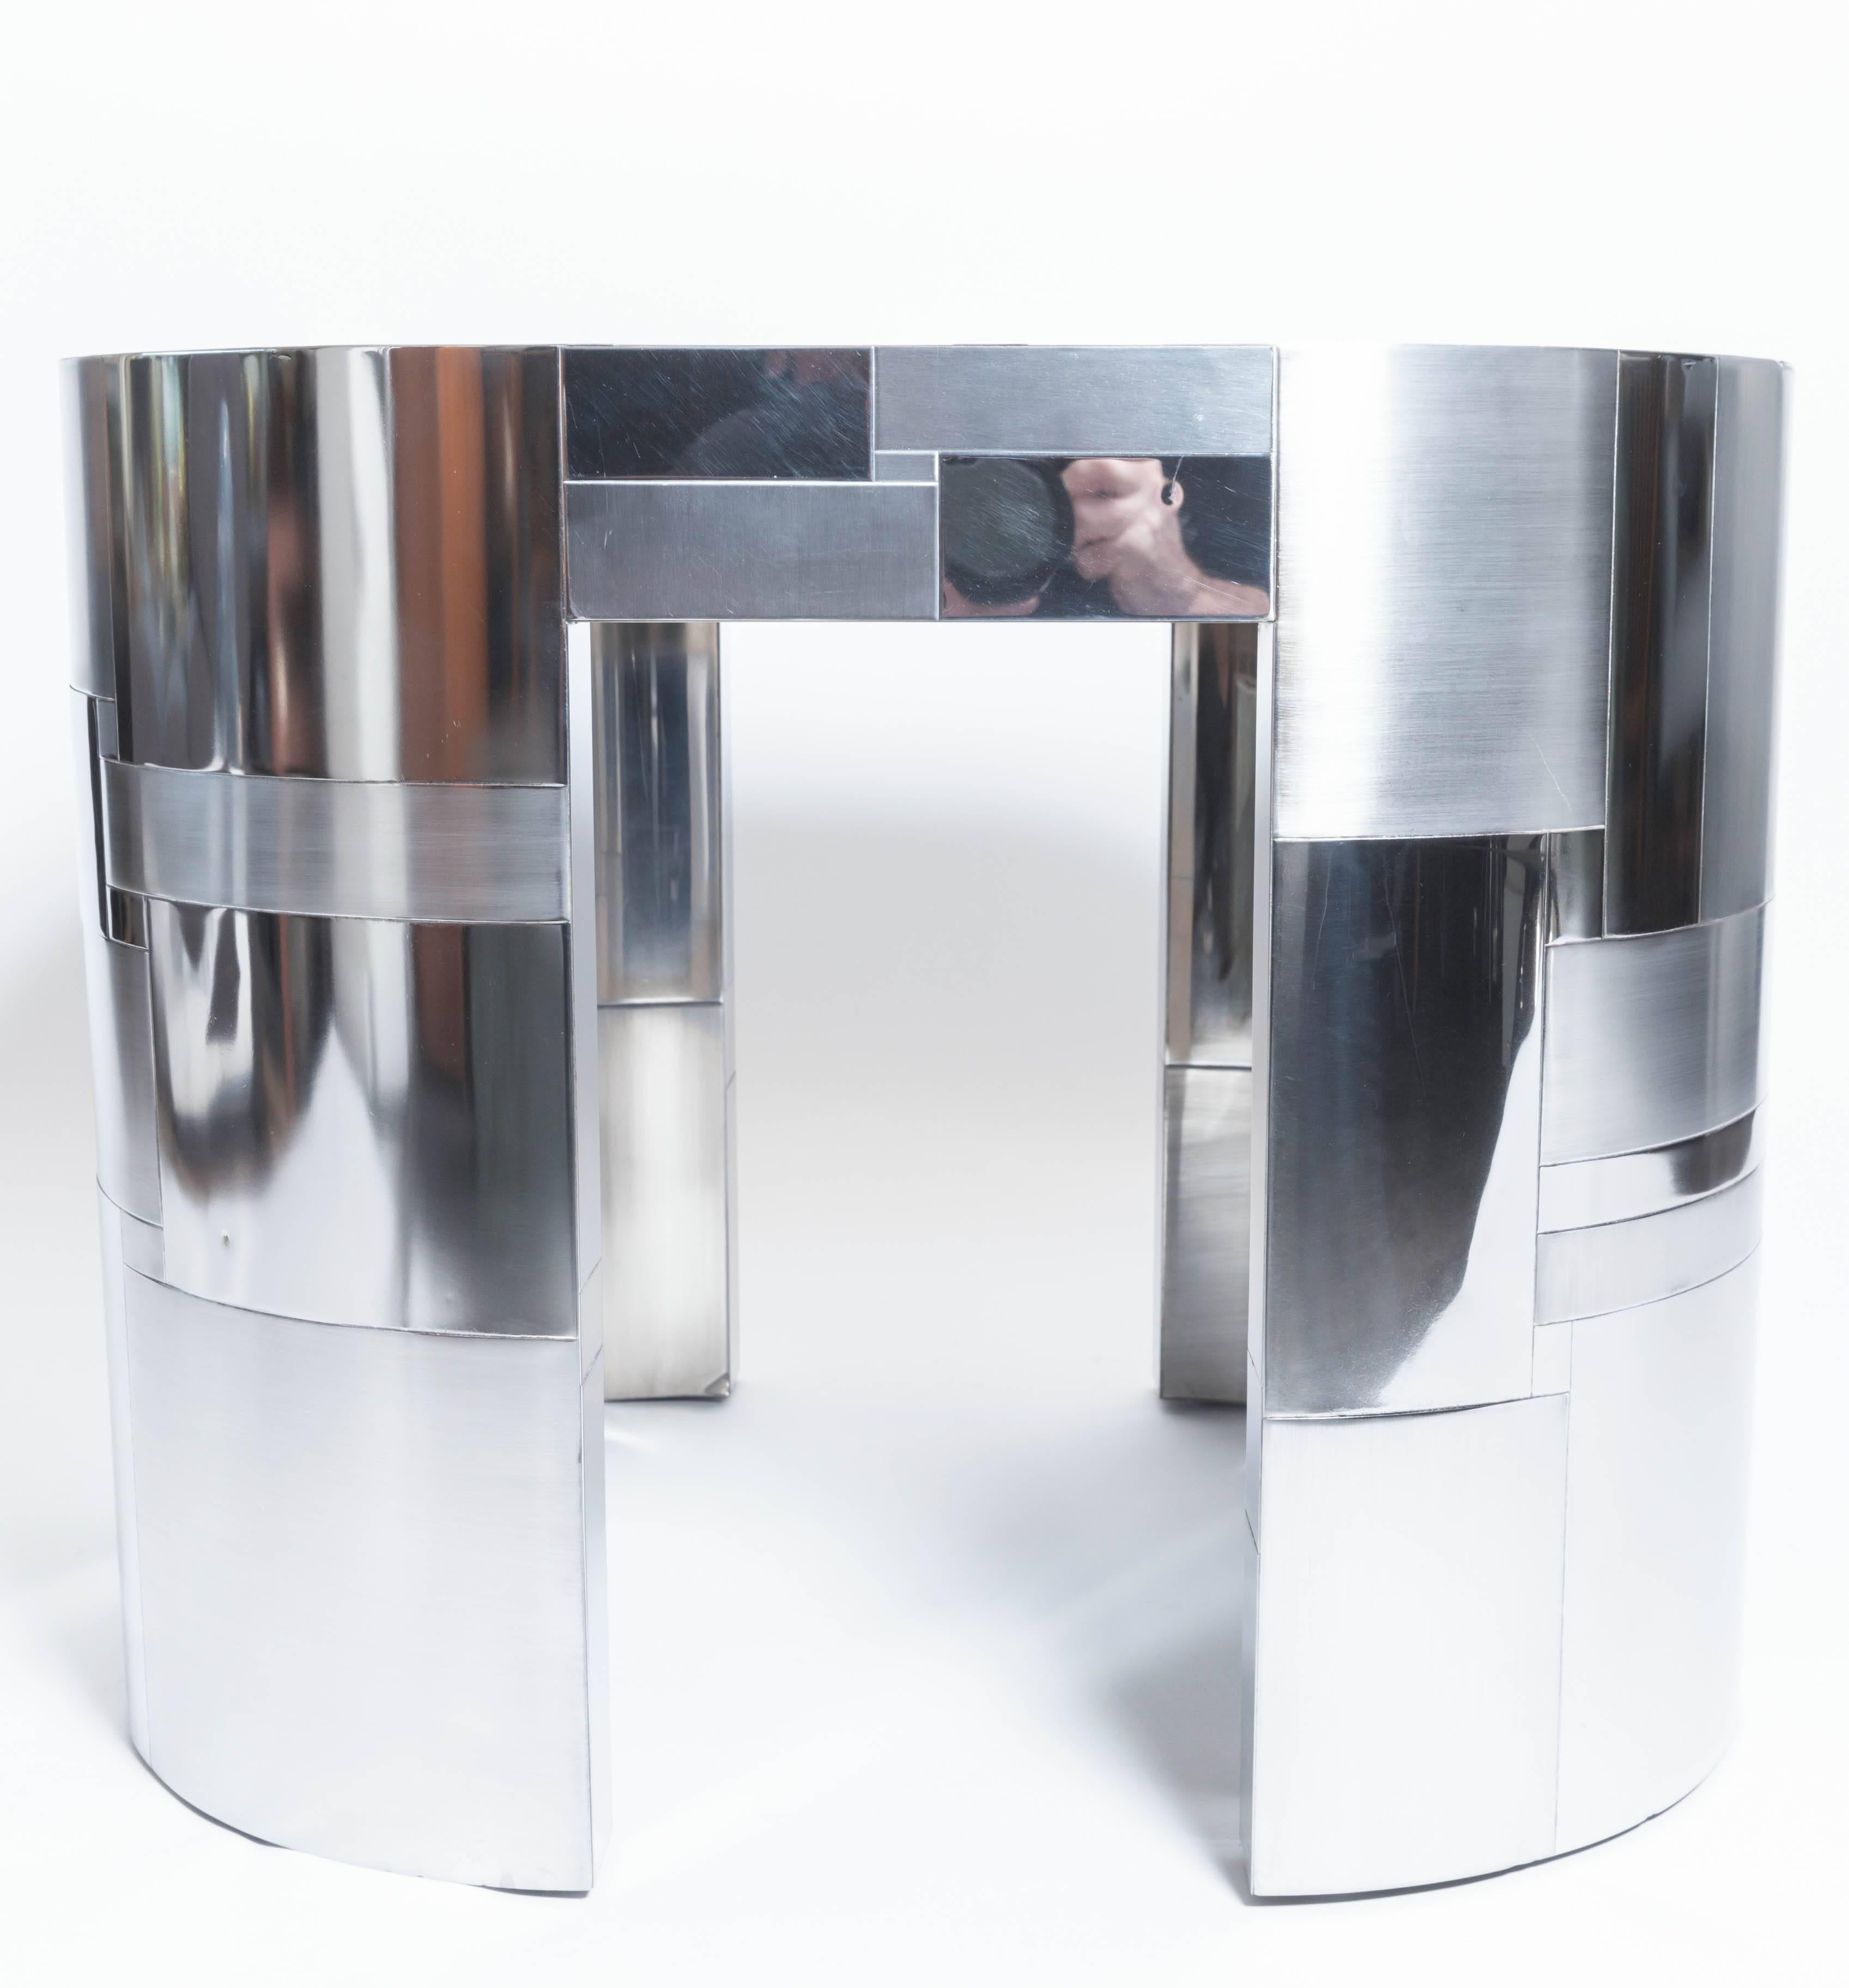 Late 20th Century Chrome Plated Occasional Table by Paul Evans, Cityscape PE500 Series, 1975